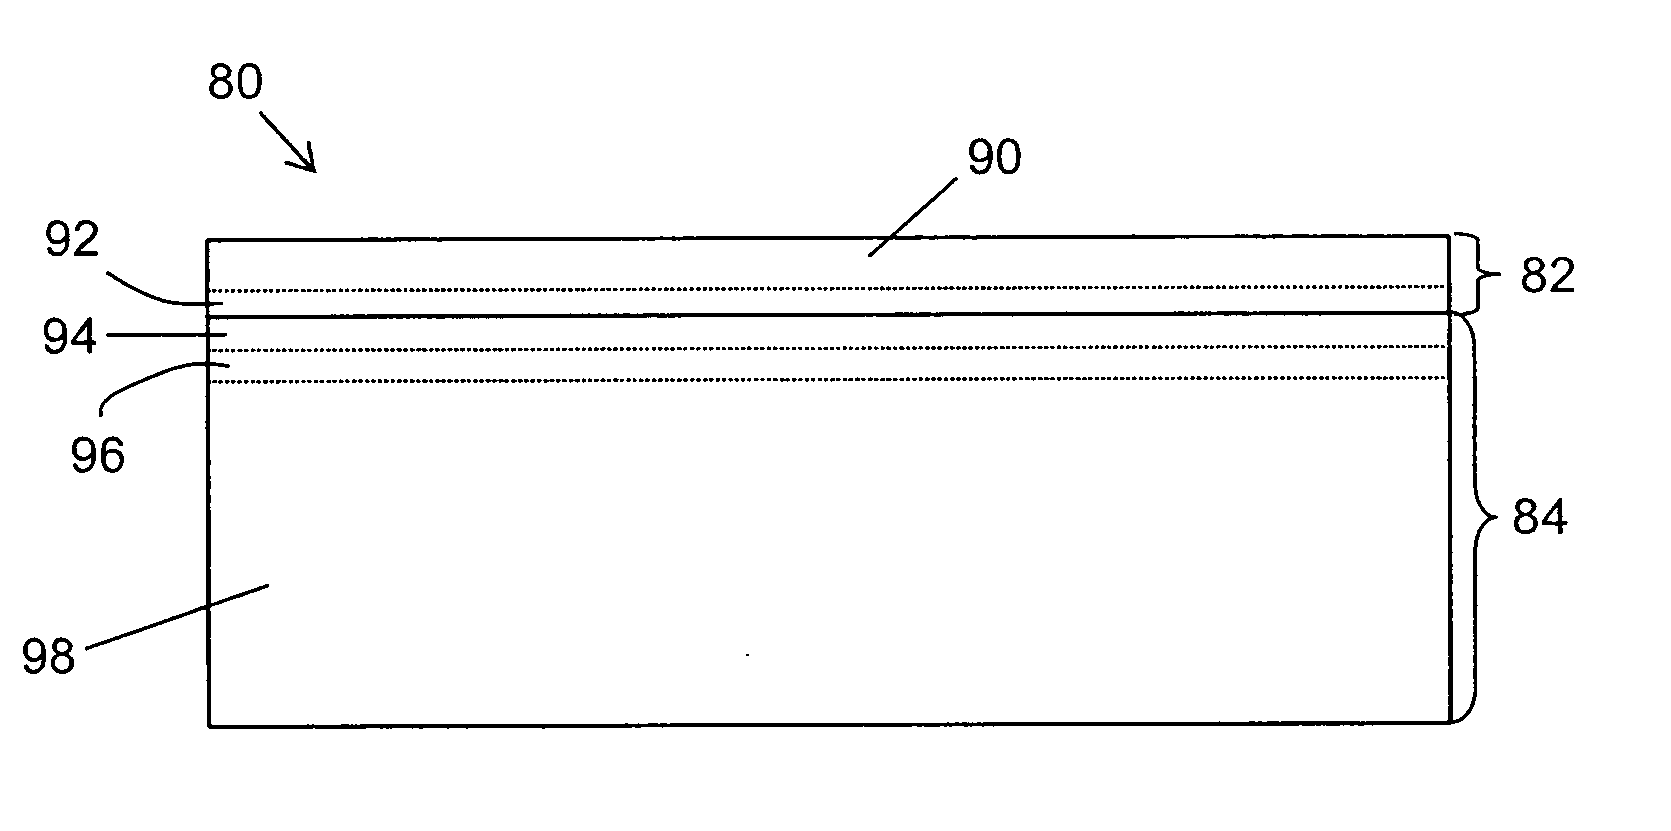 High strain glass/glass-ceramic containing semiconductor-on-insulator structures